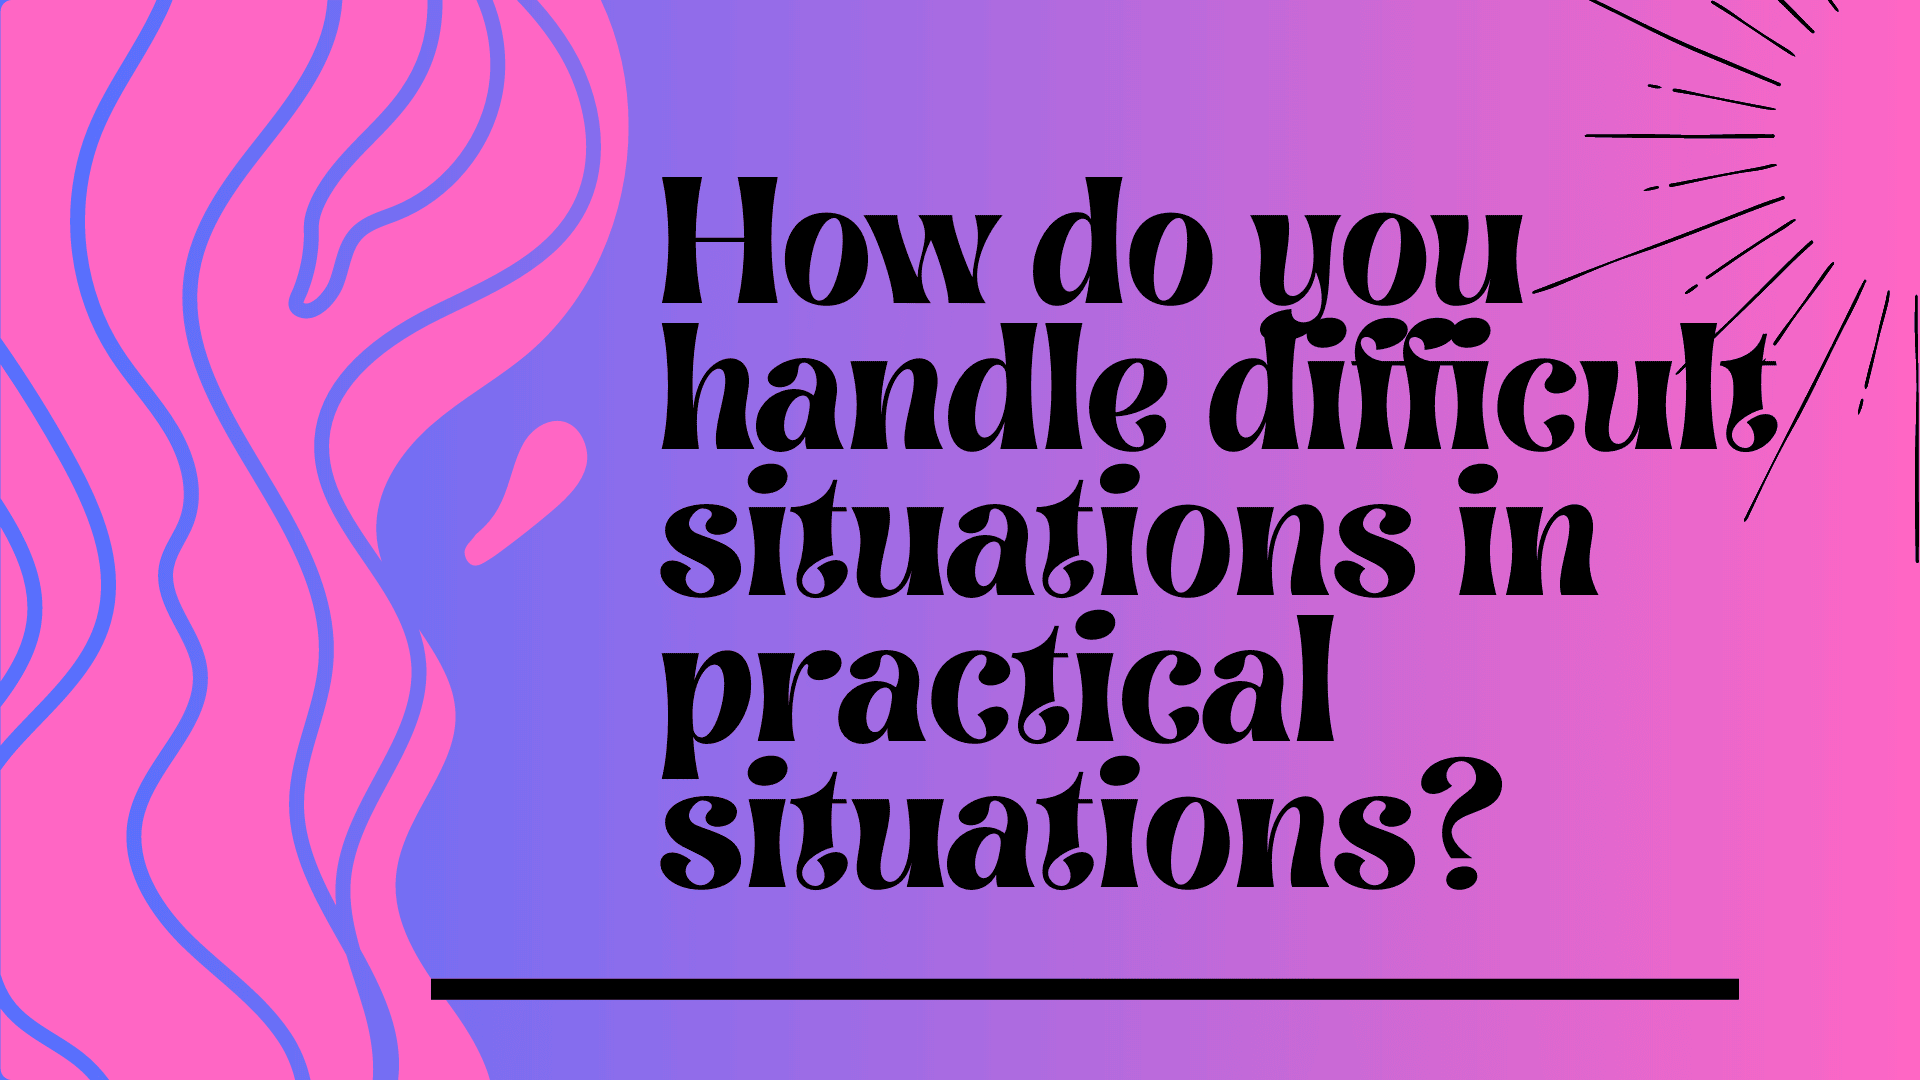 How to handle difficult situations l 12 difficult situation synonyms